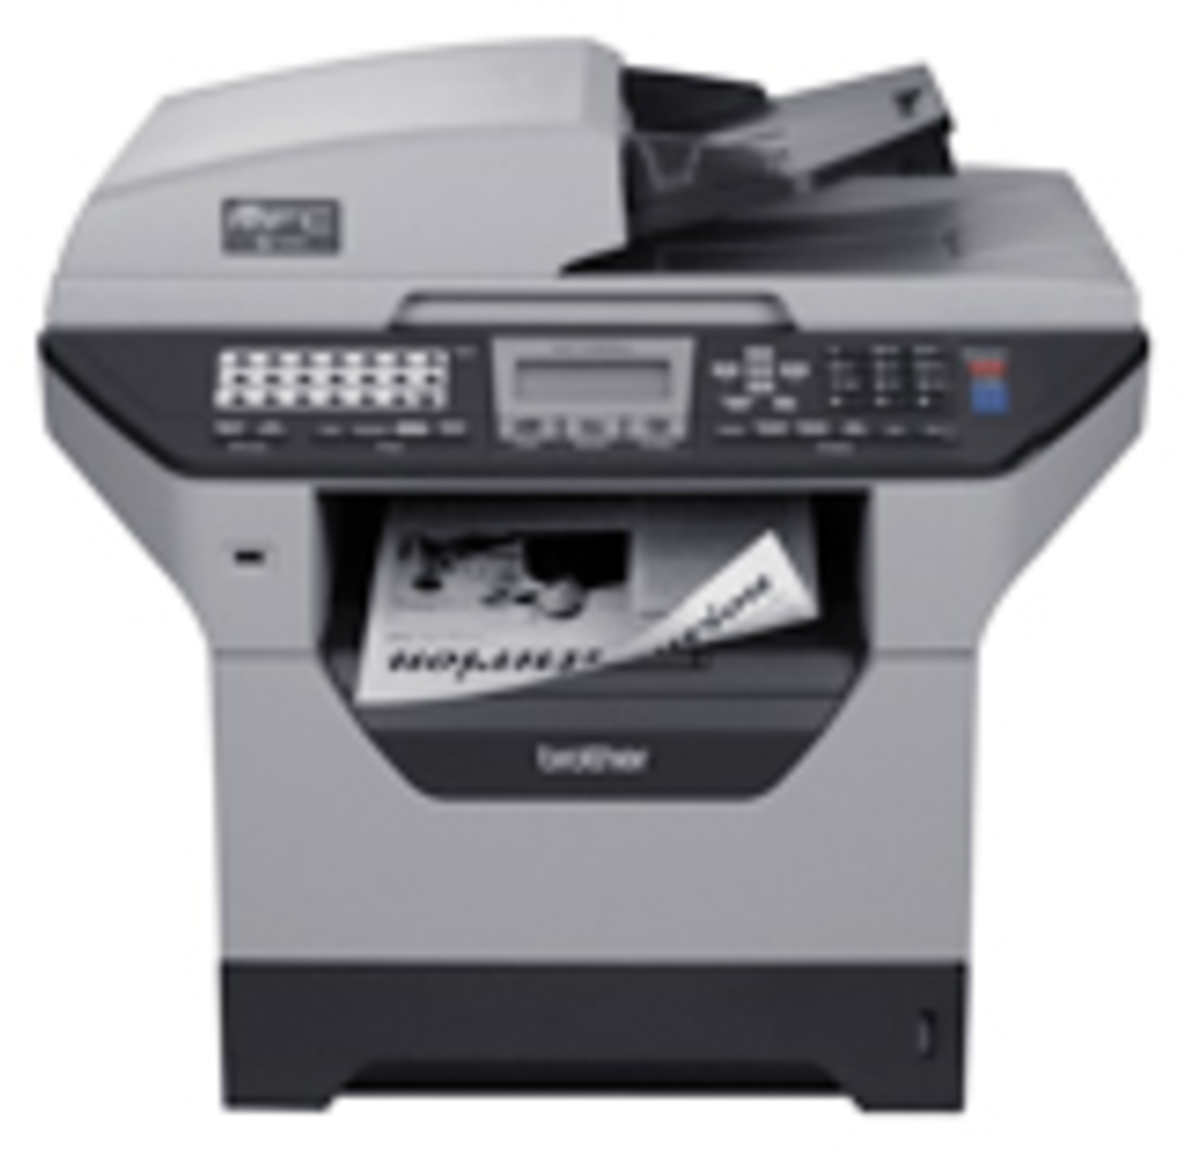 Printers Reviews, Features, and Deals - Reviewed